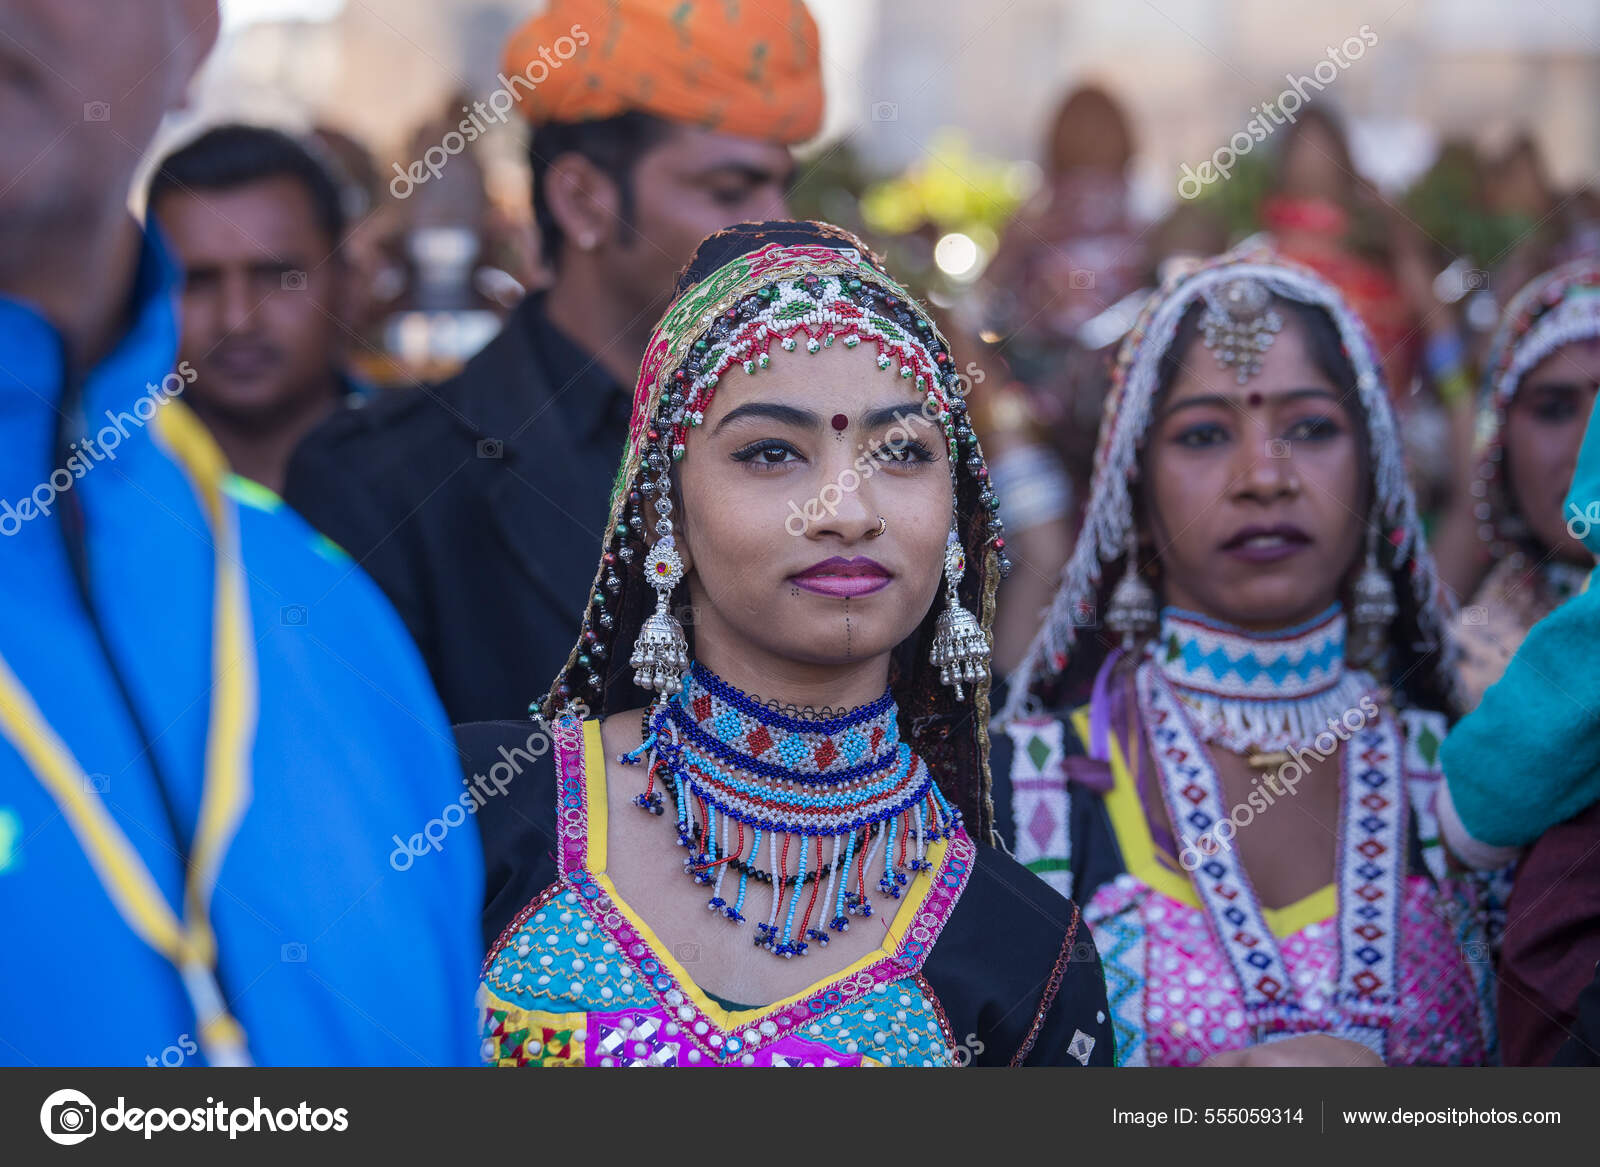 Young Girl Traditional Rajasthani Attire Camel Stock Photo 1424266985 |  Shutterstock